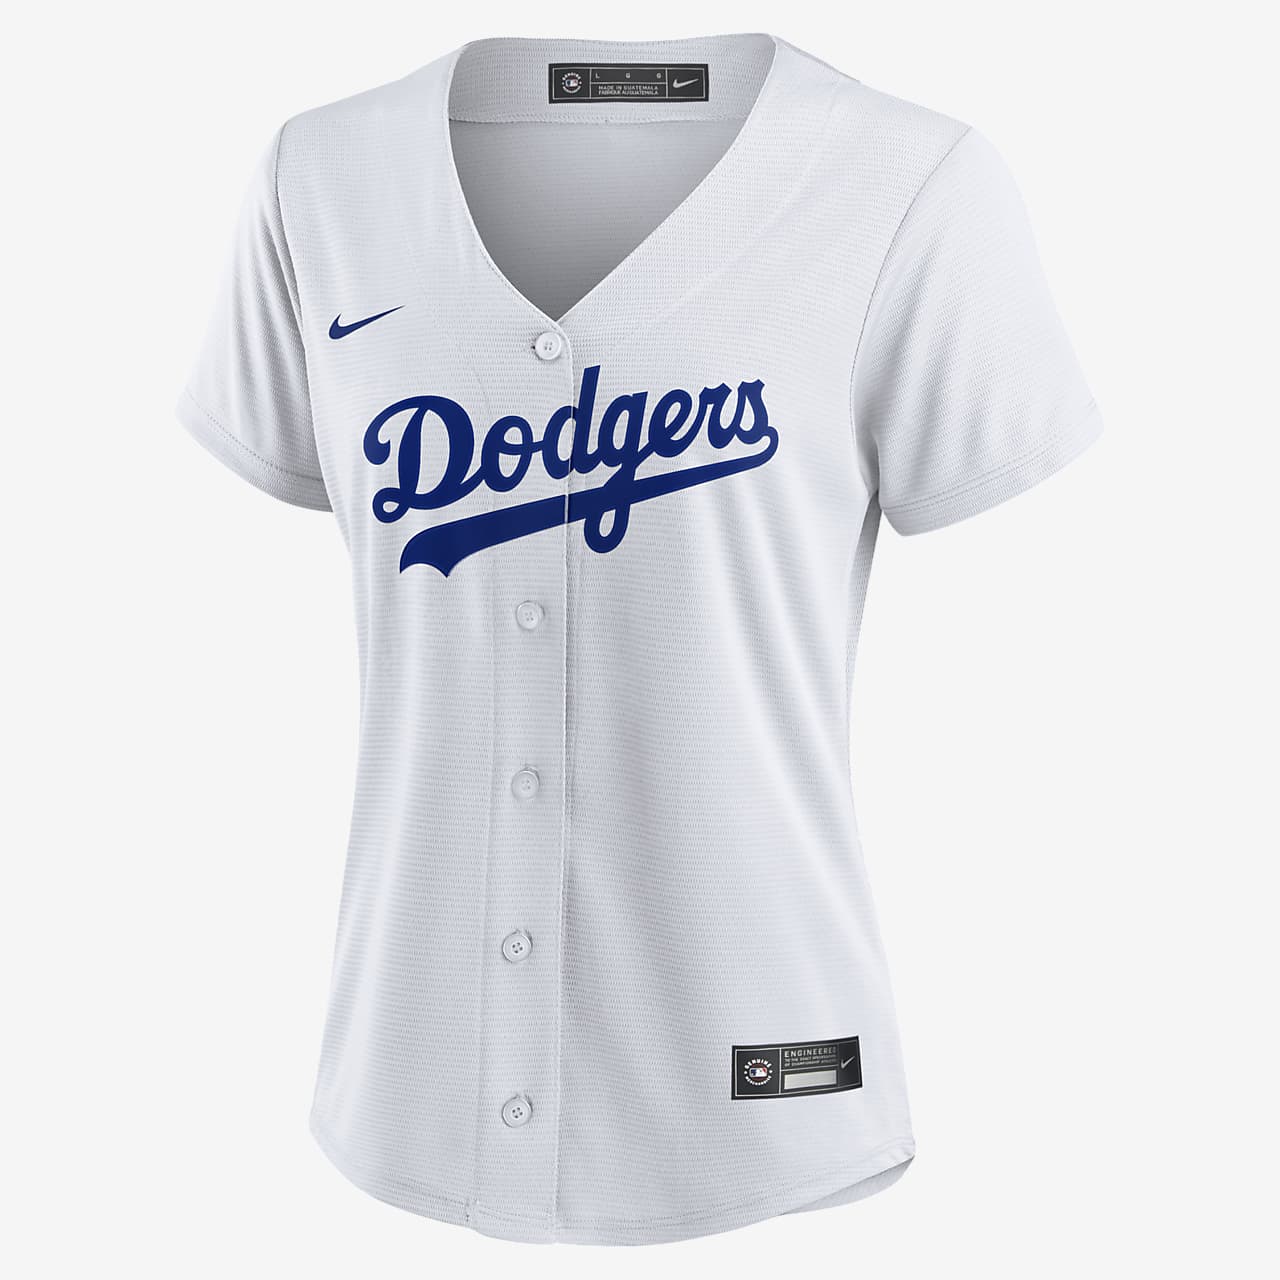 style dodgers jersey mens